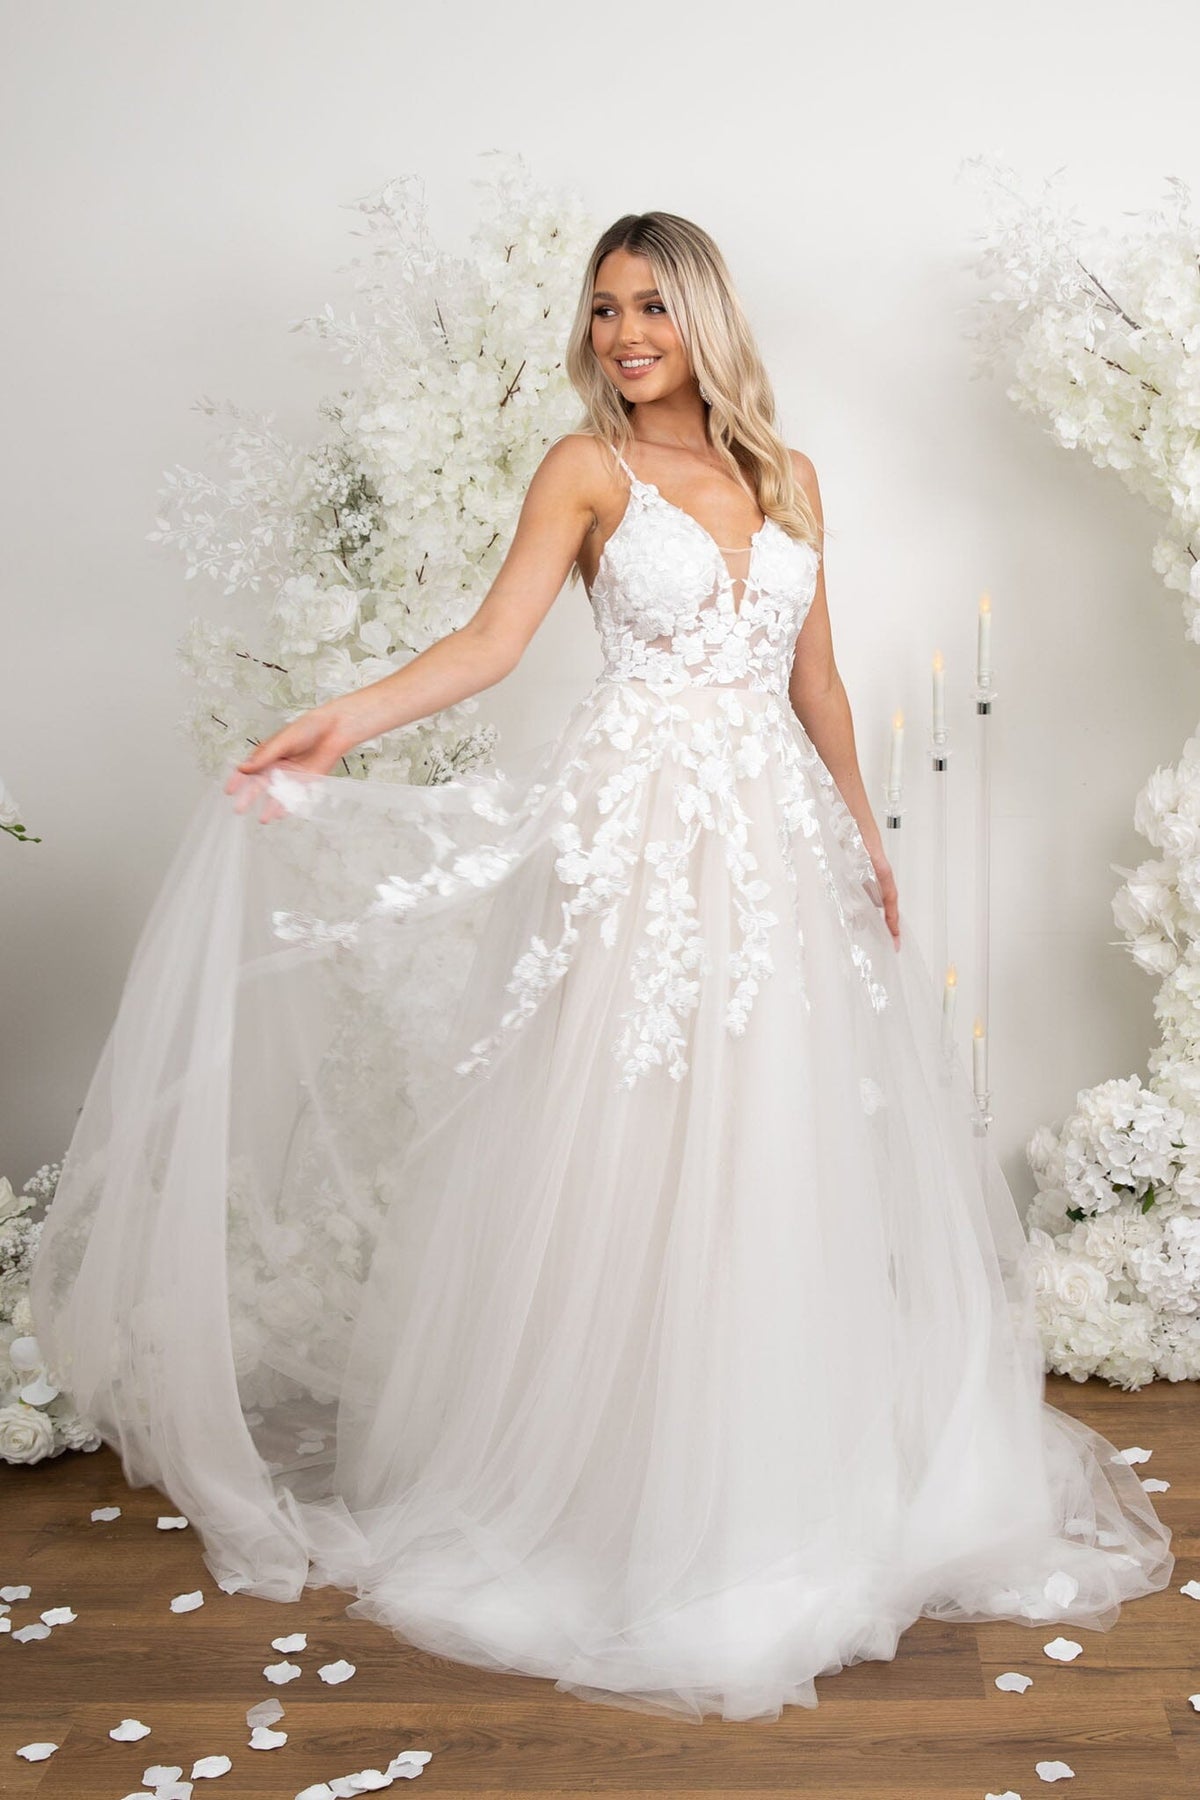 Ivory White Tull A-line Bridal Gown with Hand-Sewn Floral Lace Motifs, Pearl Beaded Spaghetti Straps, V Neck, A-line Layered Tulle Skirt and Chapel Train